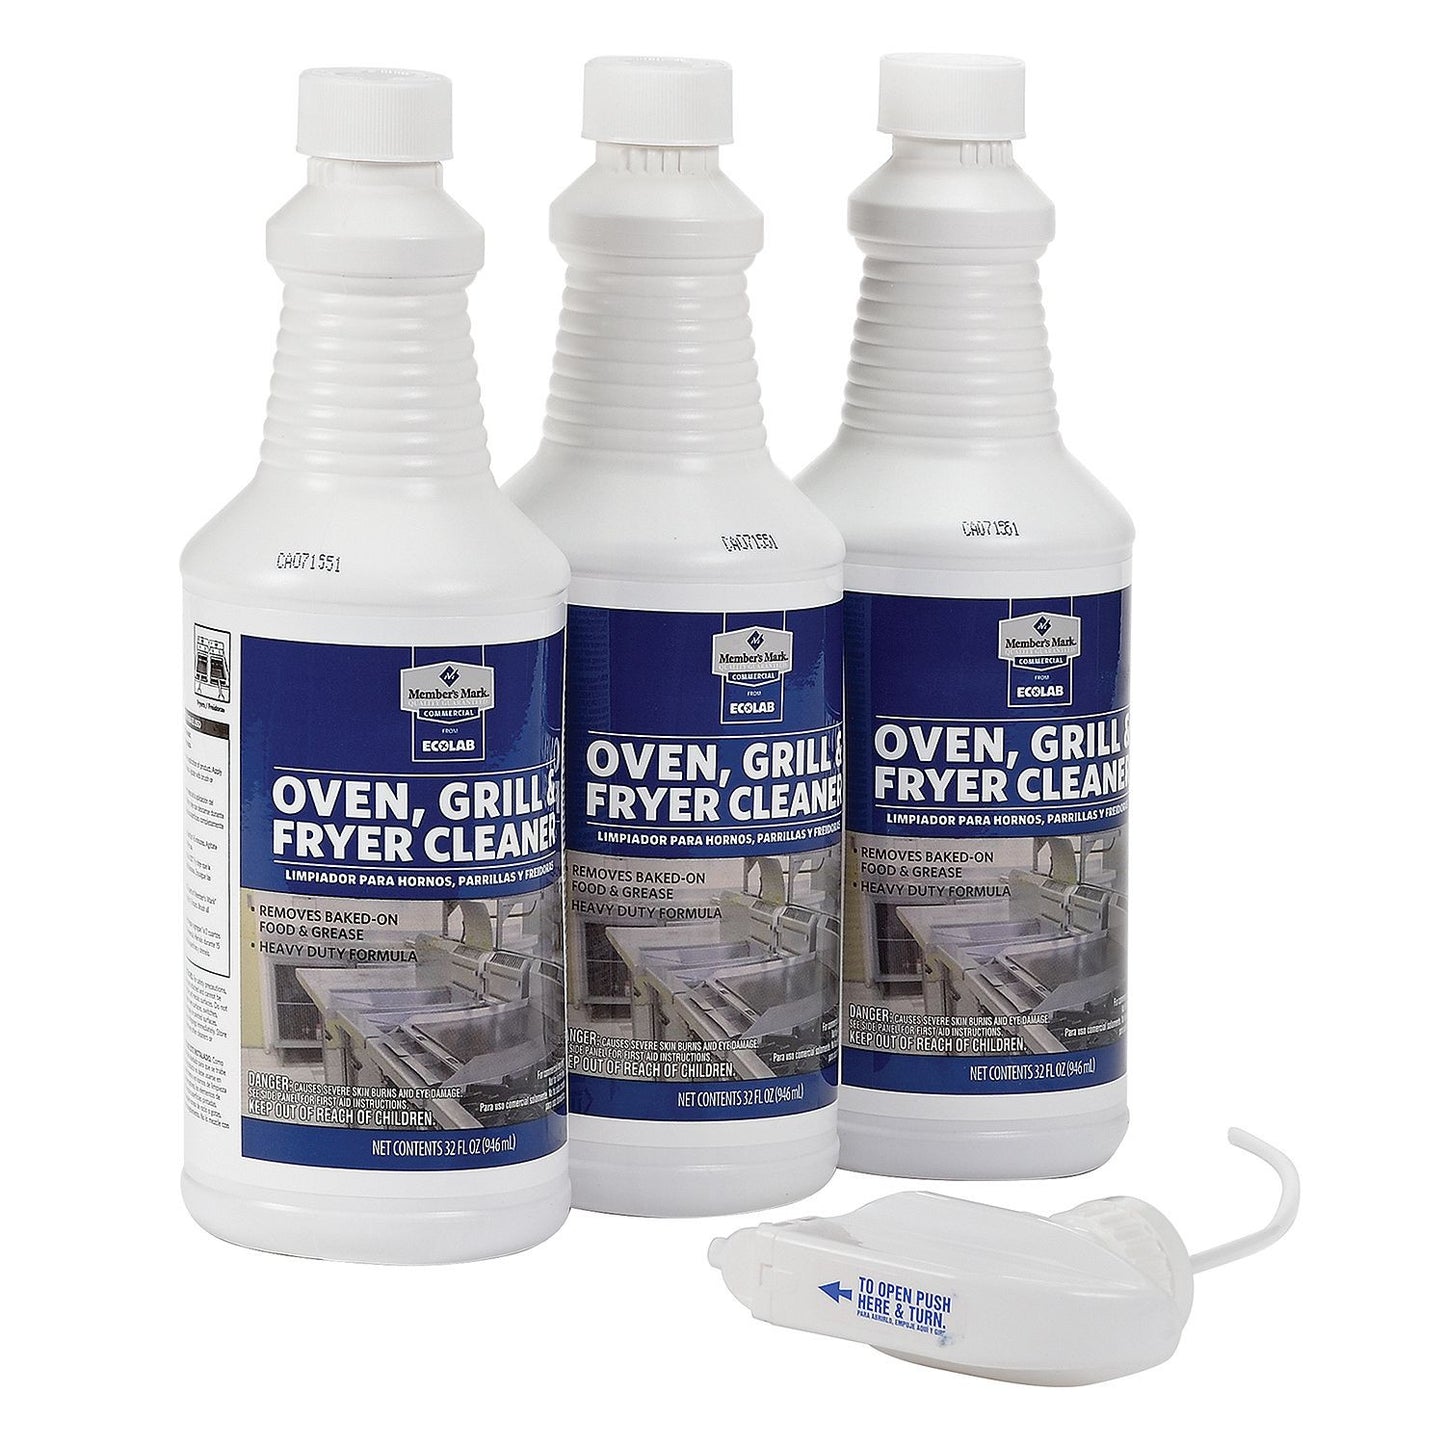 Member's Mark Commerical Oven, Grill and Fryer Cleaner - 32 oz. - 3 Pk.